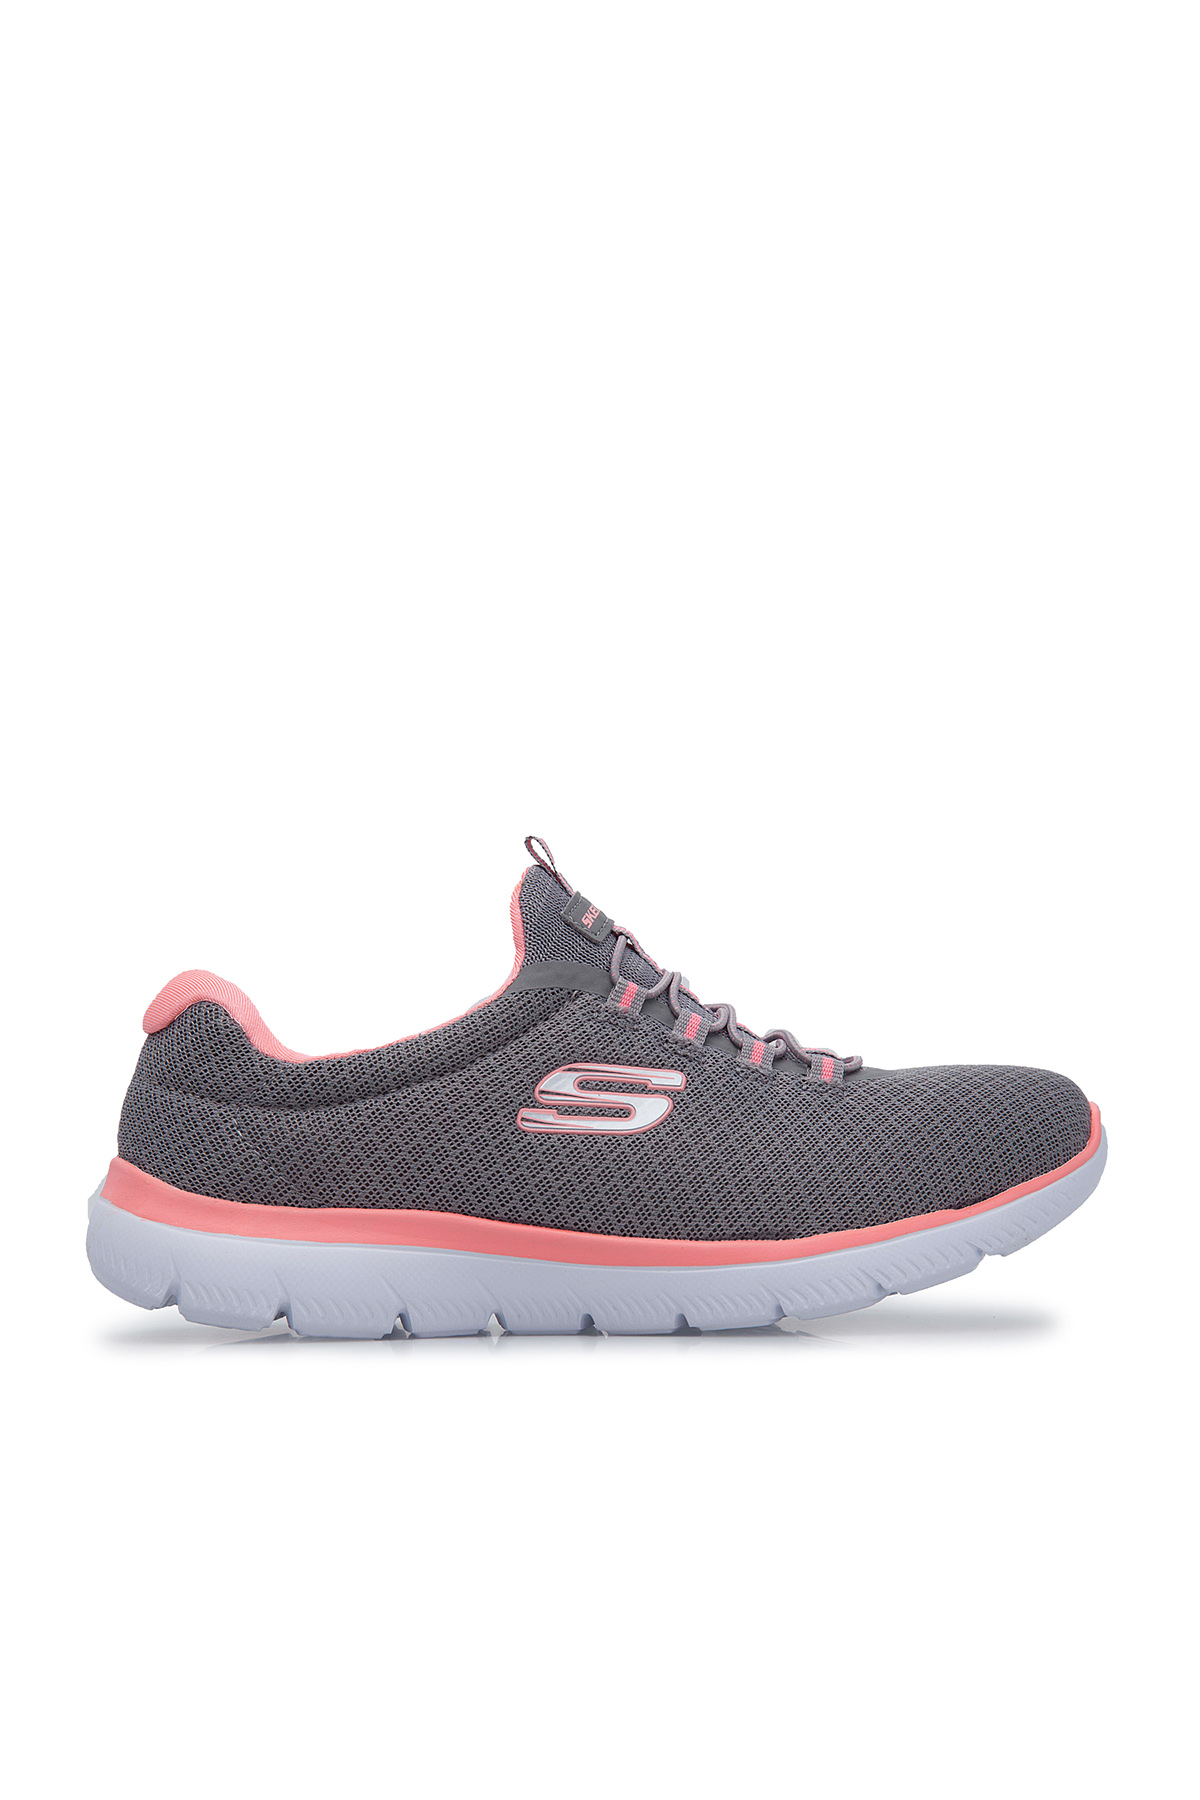 sketchers official site